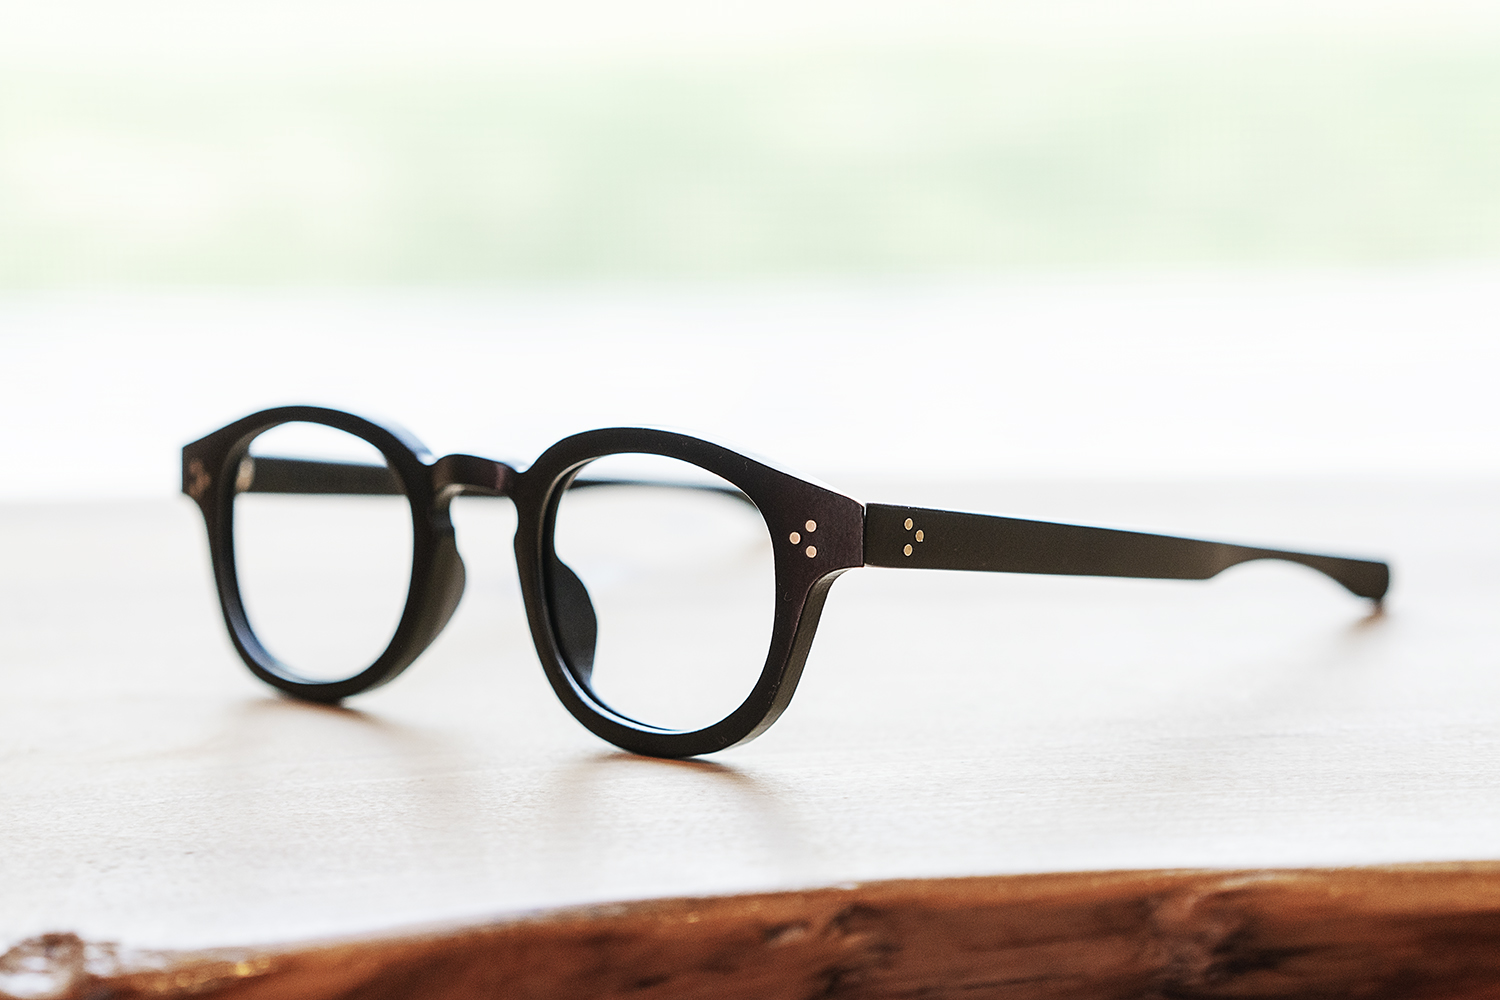 Flint, MI - Wednesday, May 9, 2018: Genusee's first frame style, the Roeper, was "democratically designed" and intended to look good on everyone. The first run will be available in two colors with either single-prescription or tinted lenses.